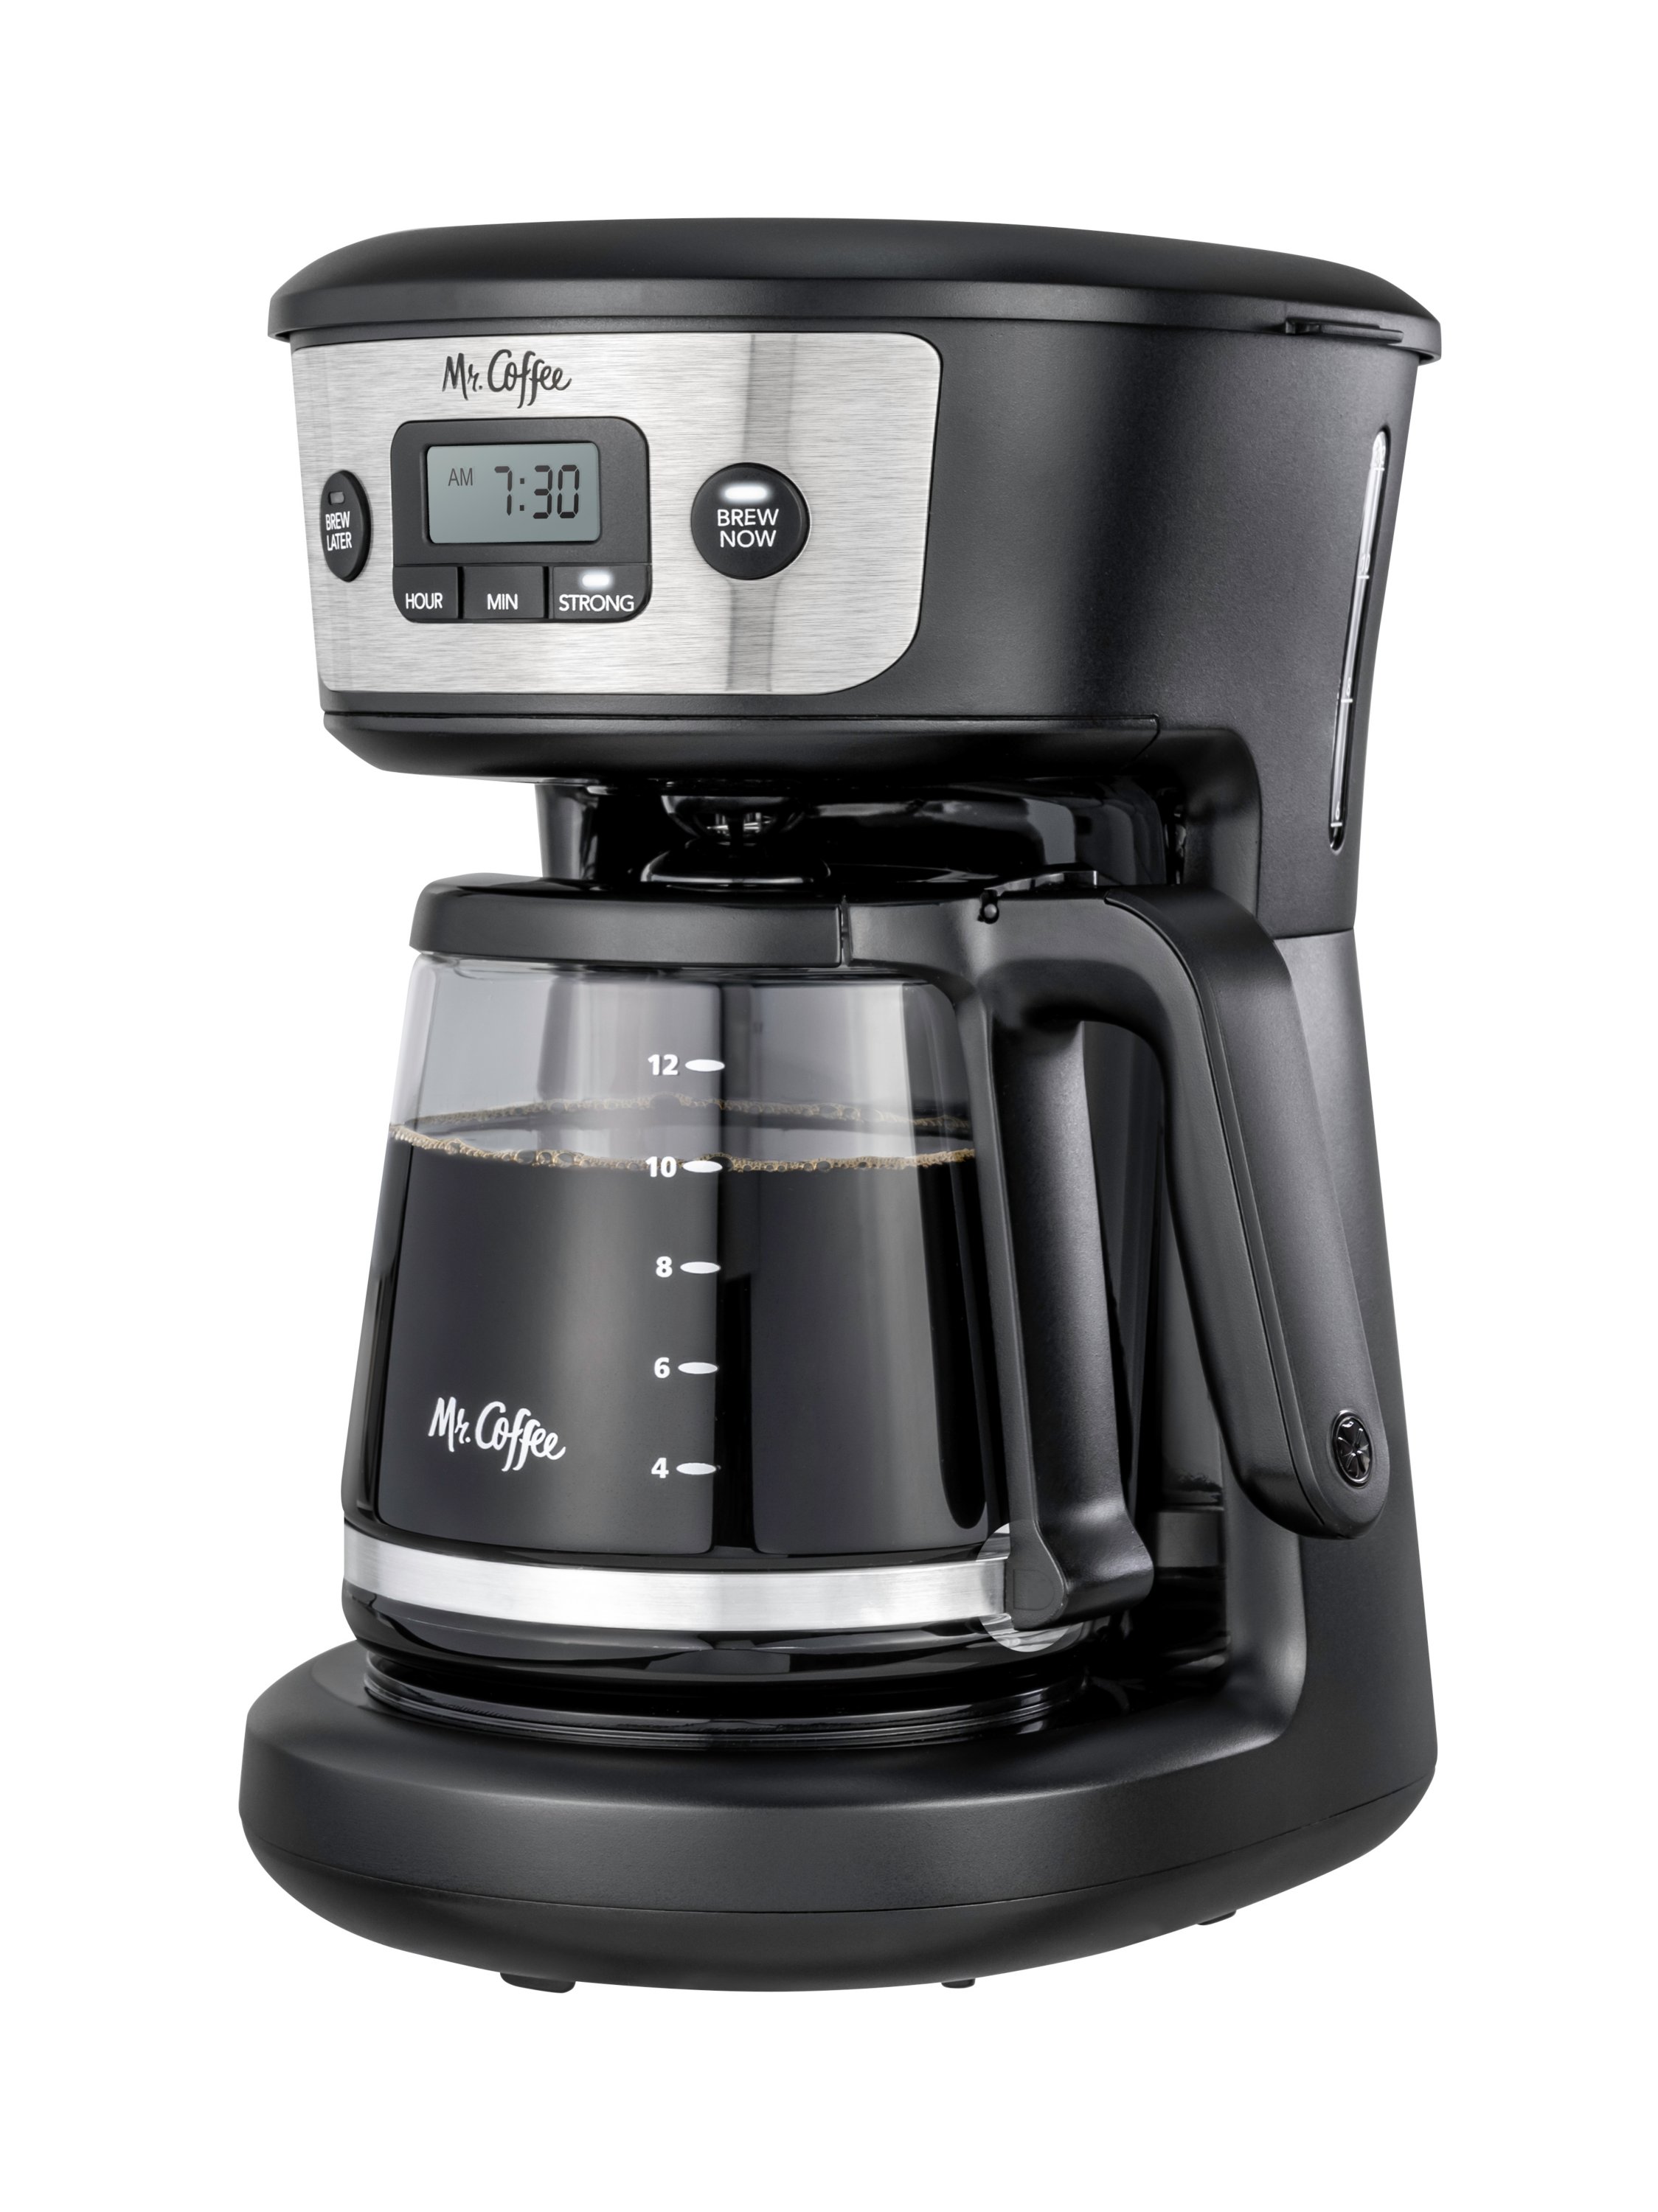 Details about   Mr Coffee Advanced Brew 12 Cup Coffee Maker Machine Programmable Kitchen Home 